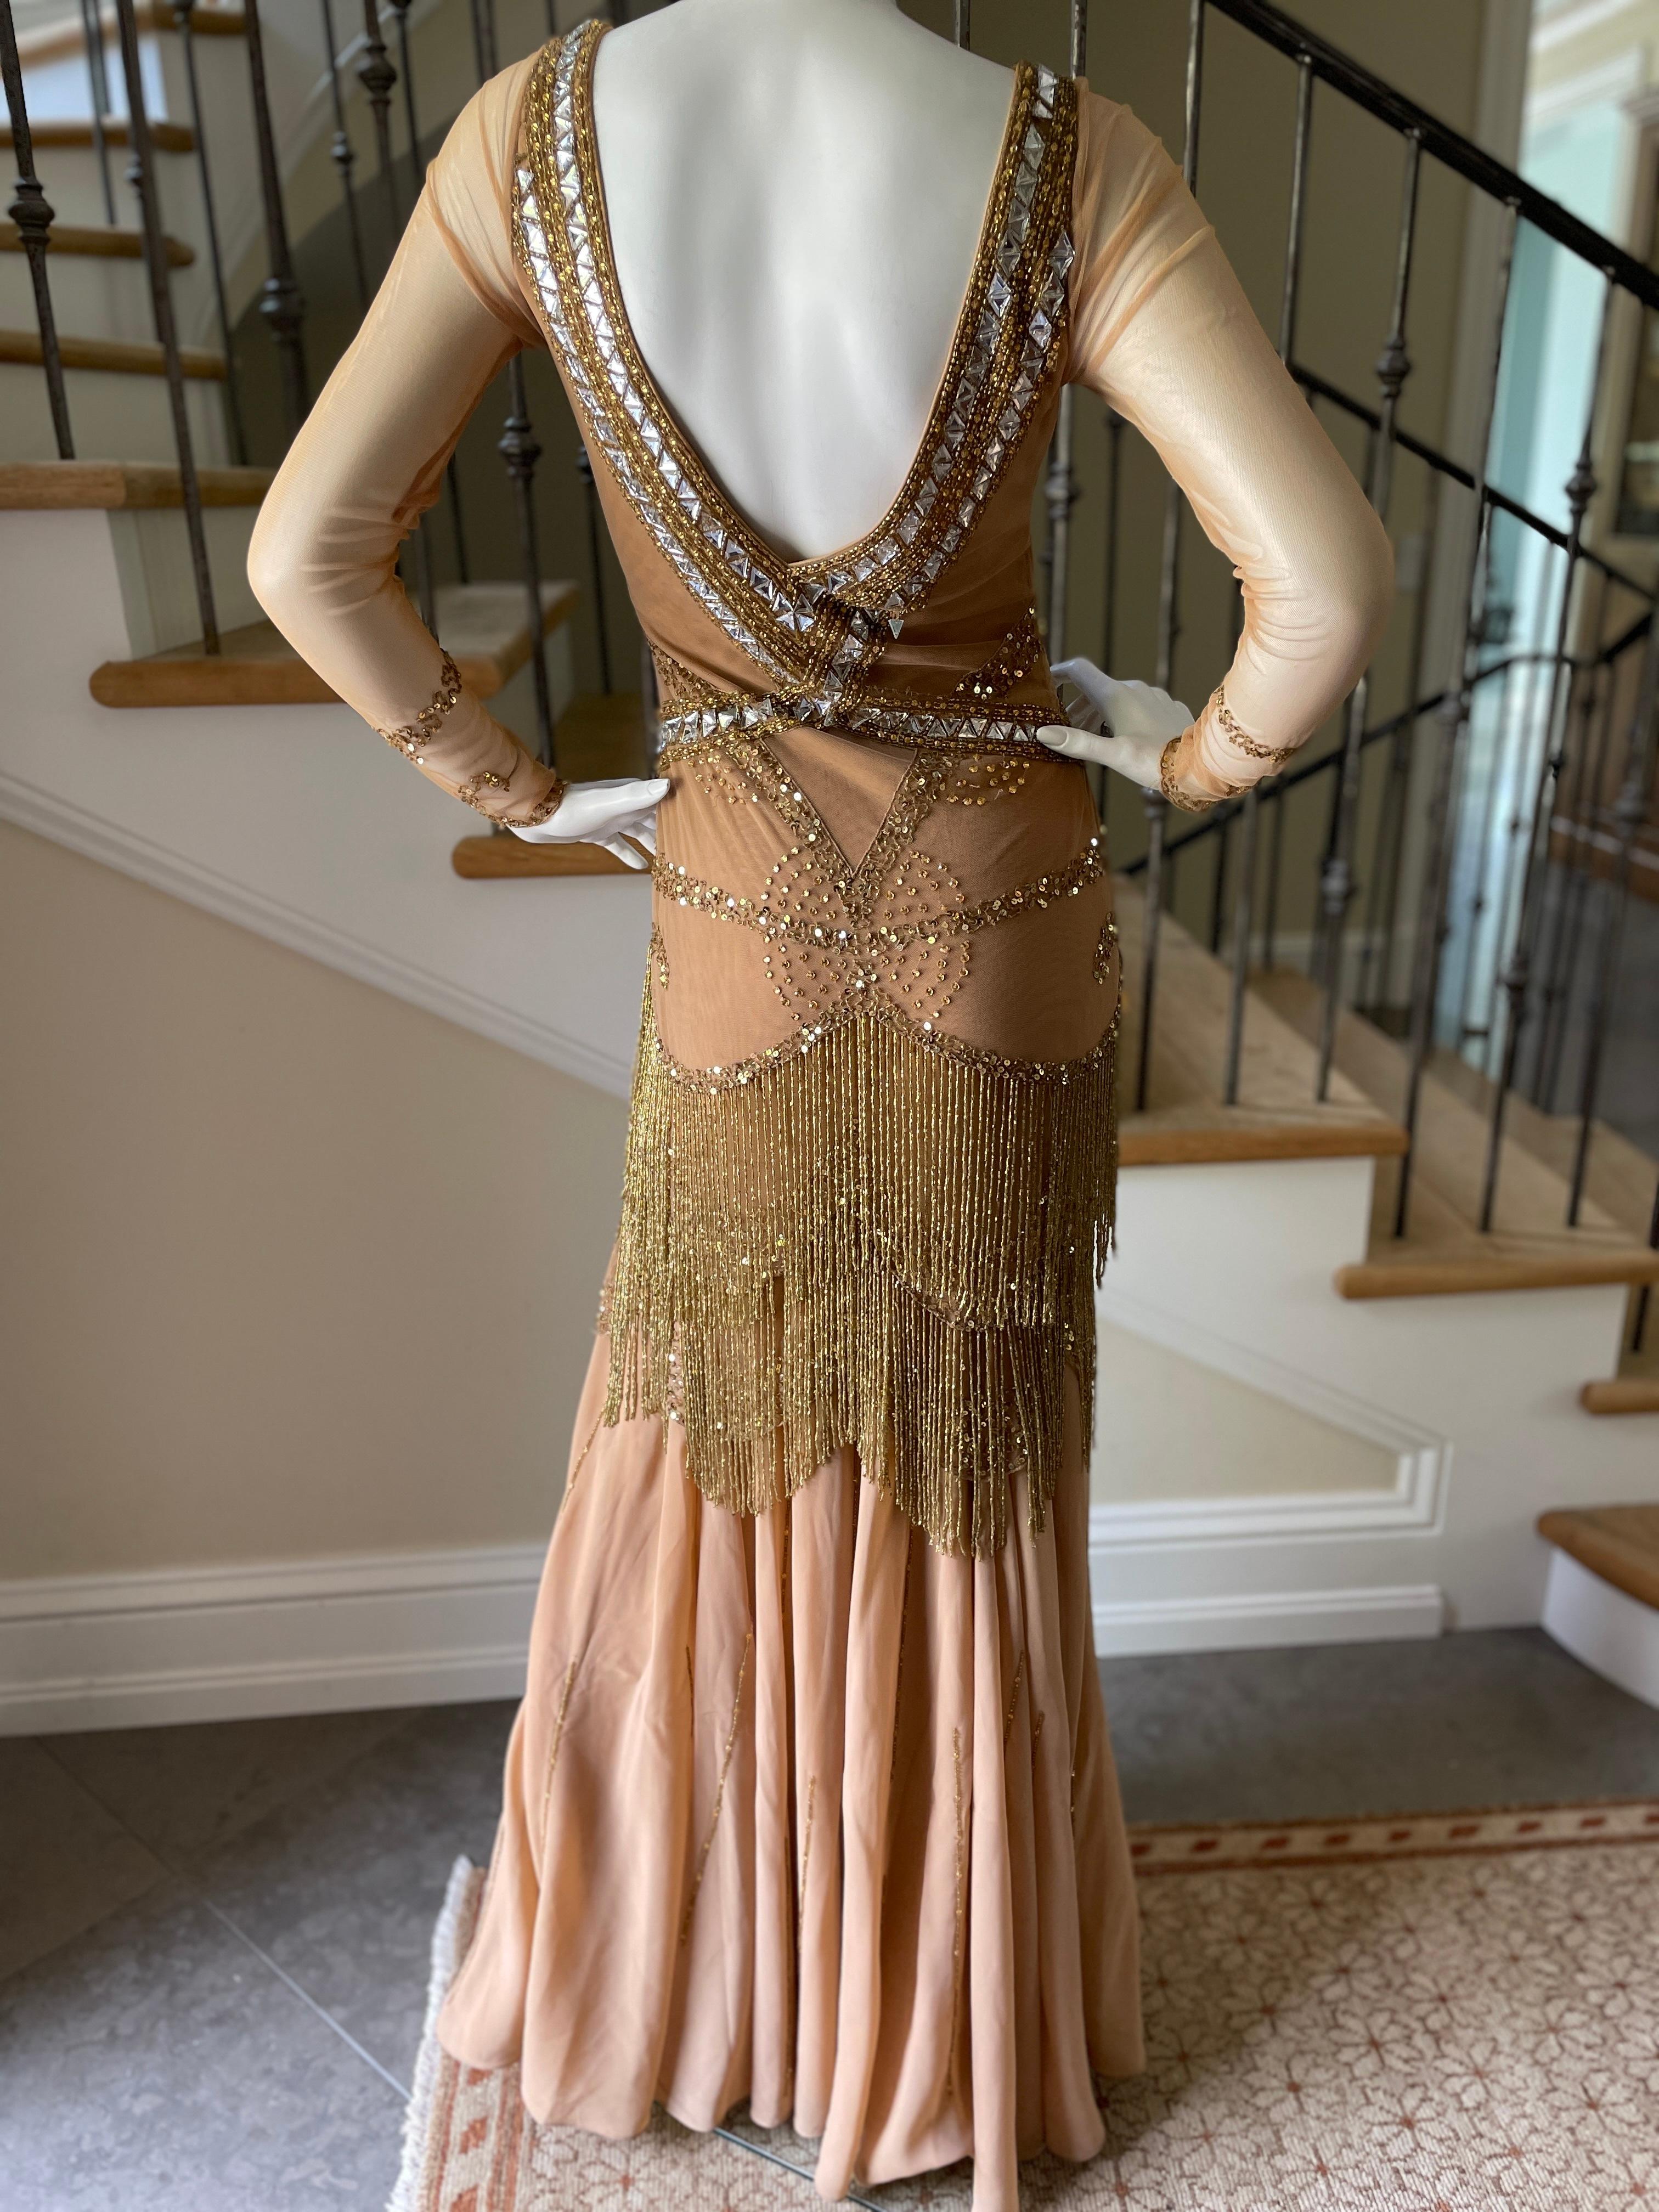 Class Cavalli Extravagantly Jeweled Vintage Evening Dress with Beaded Fringe For Sale 4